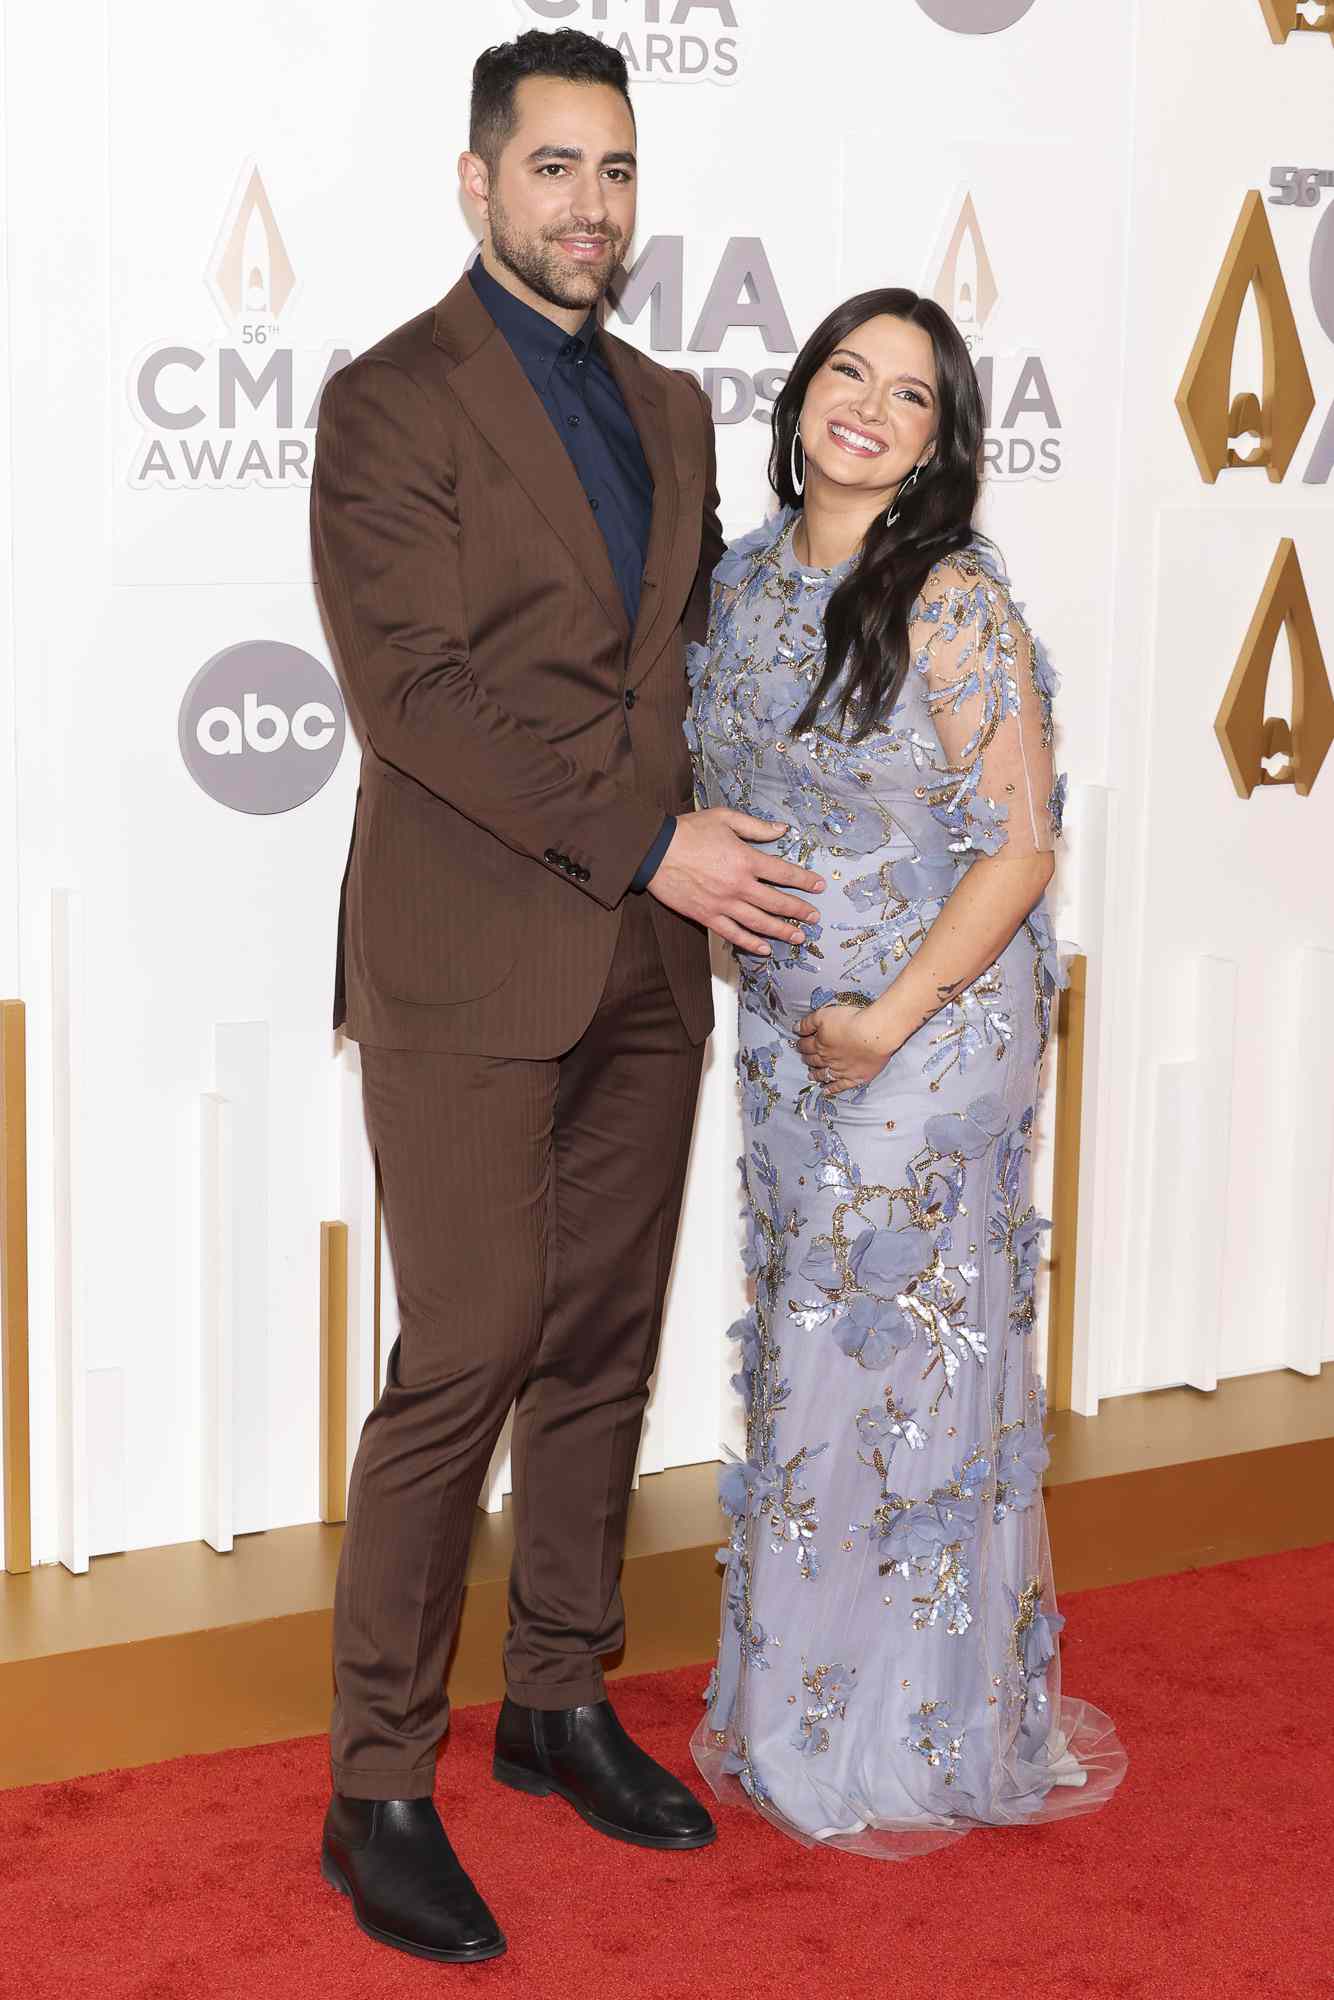 Surprise! At the CMA Awards, Katie Stevens of The Bold Type and her husband Paul DiGiovanni announce their pregnancy.